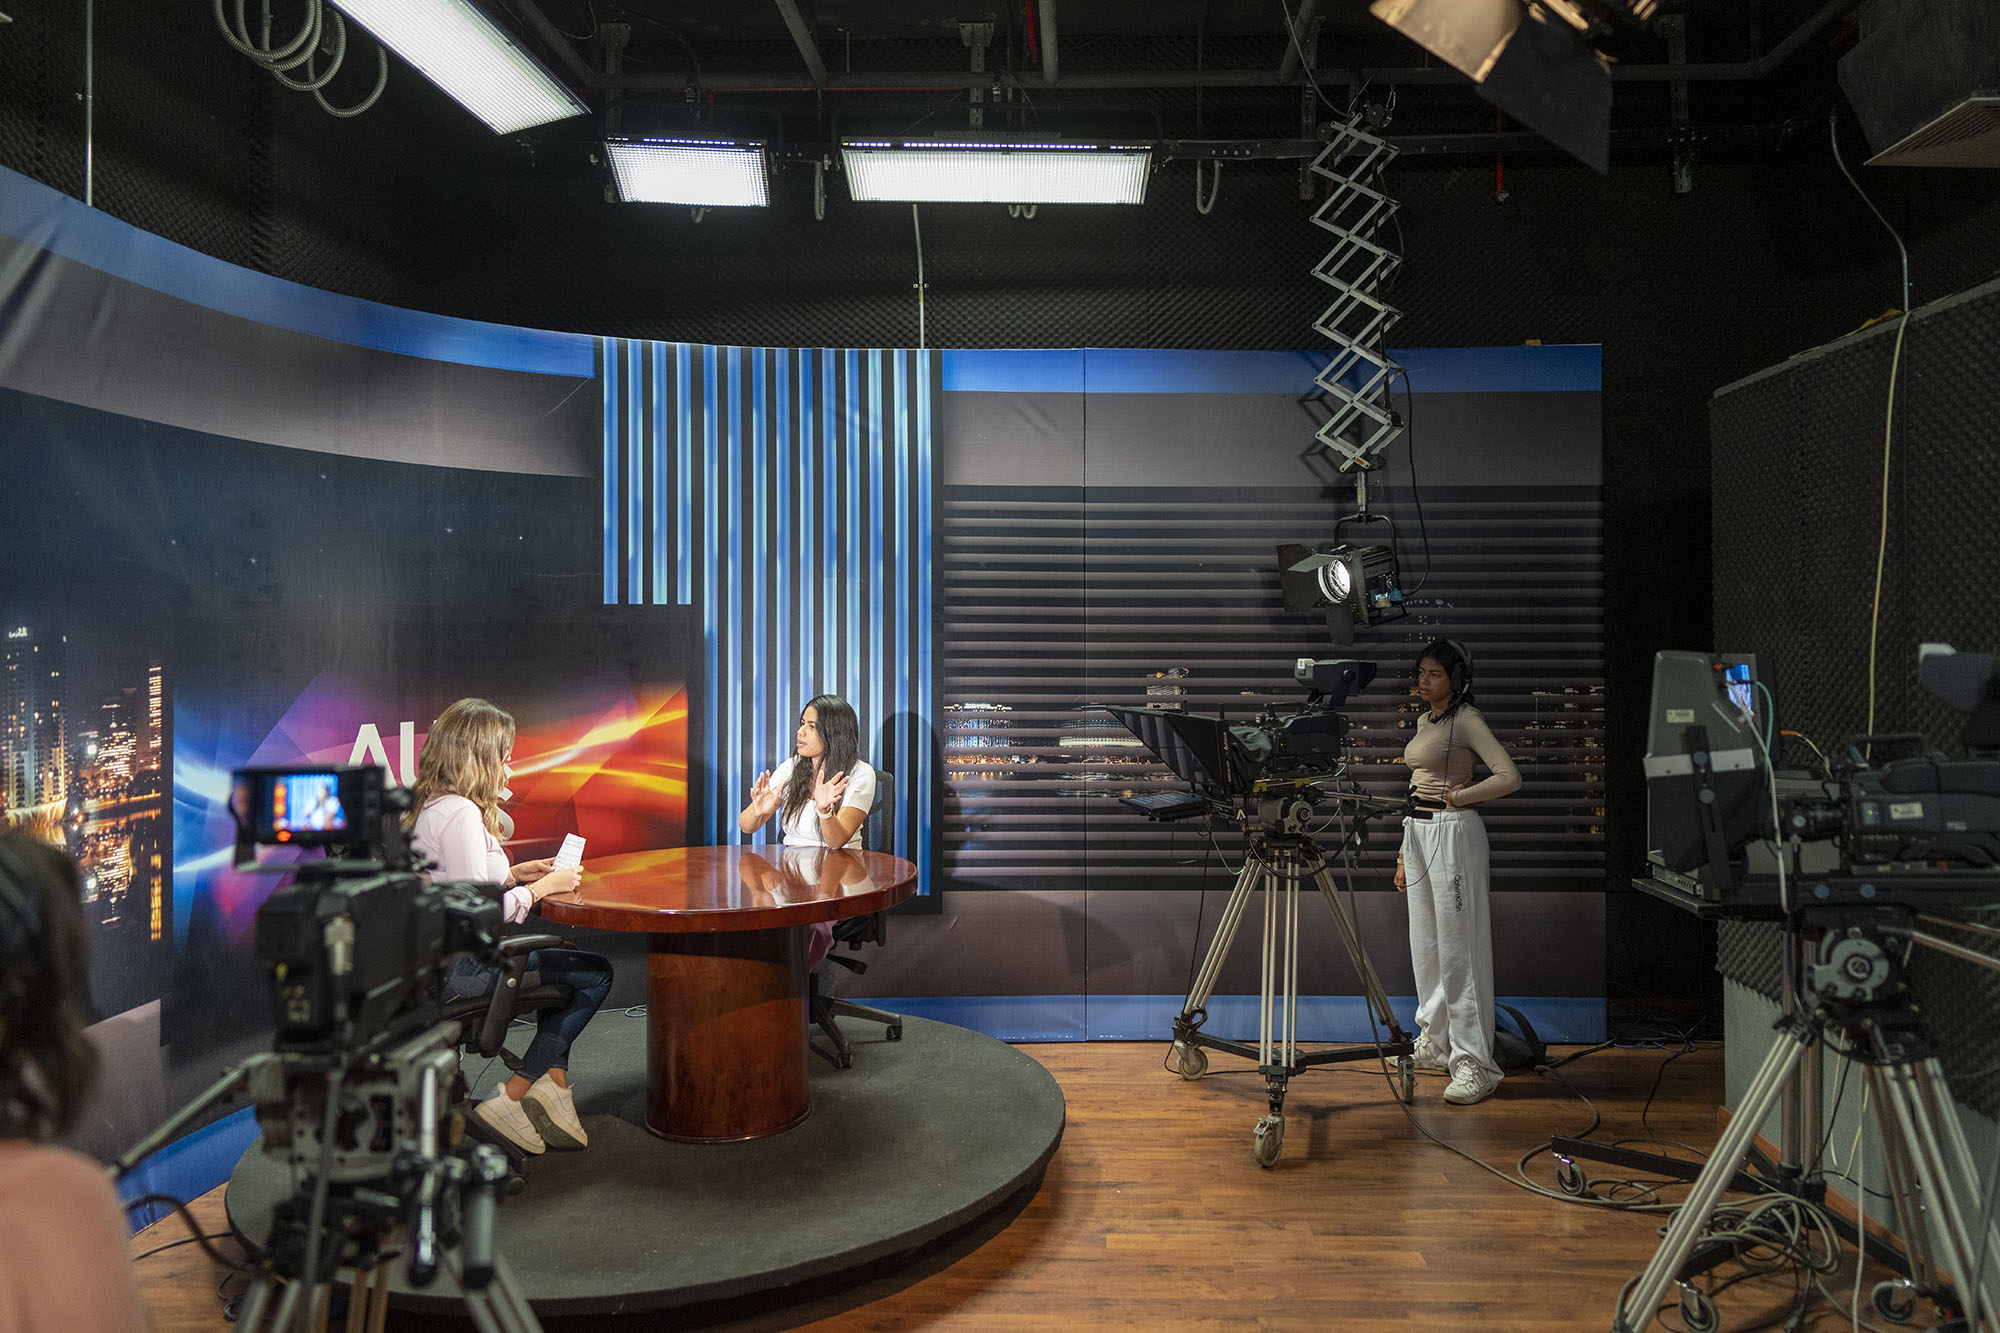 TV and journalism program image of a TV studio and students working in front and behind the camera